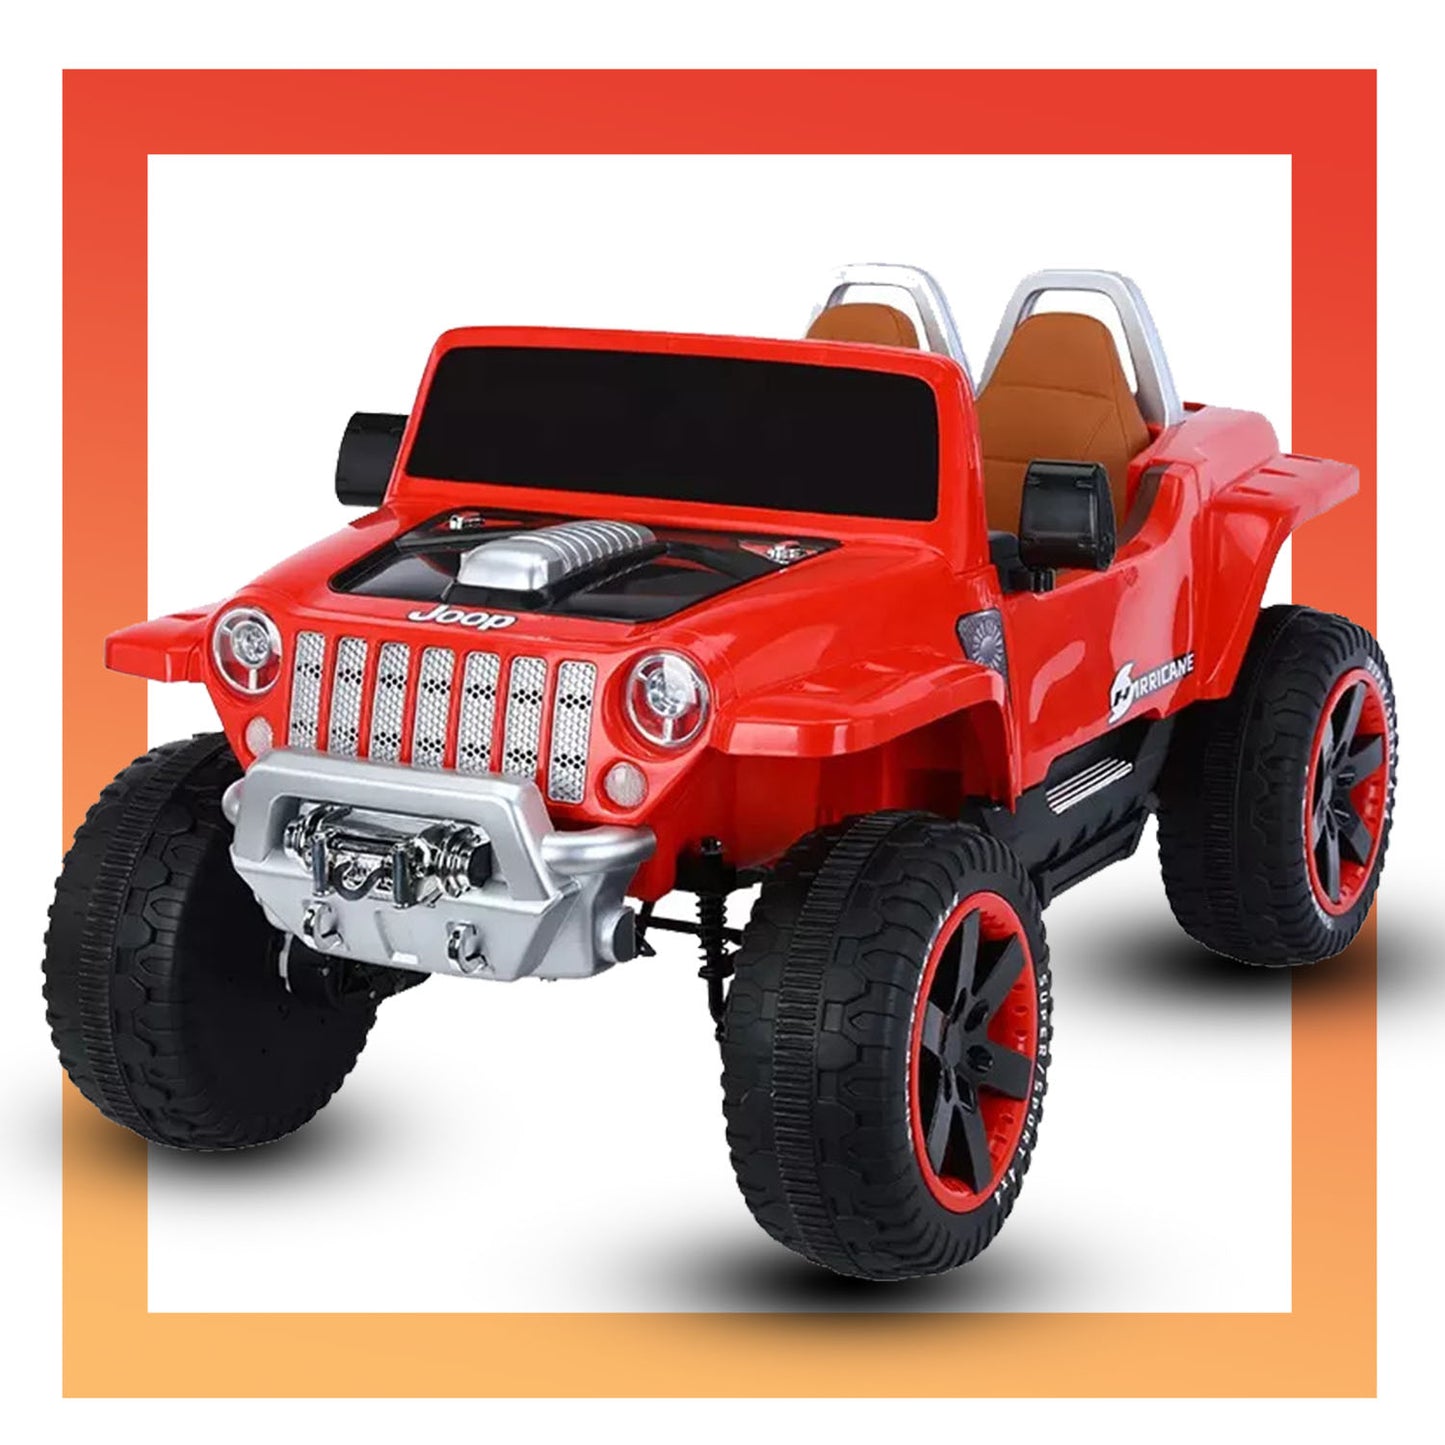 Fliptoy™ Hurricane Kids Car, Baby Toy Car, Rechargeable Battery-Operated Ride on Jeep for Kids with R/C Electric Motor Big Car for Kids Cars, Baby Car for Boys & Girls